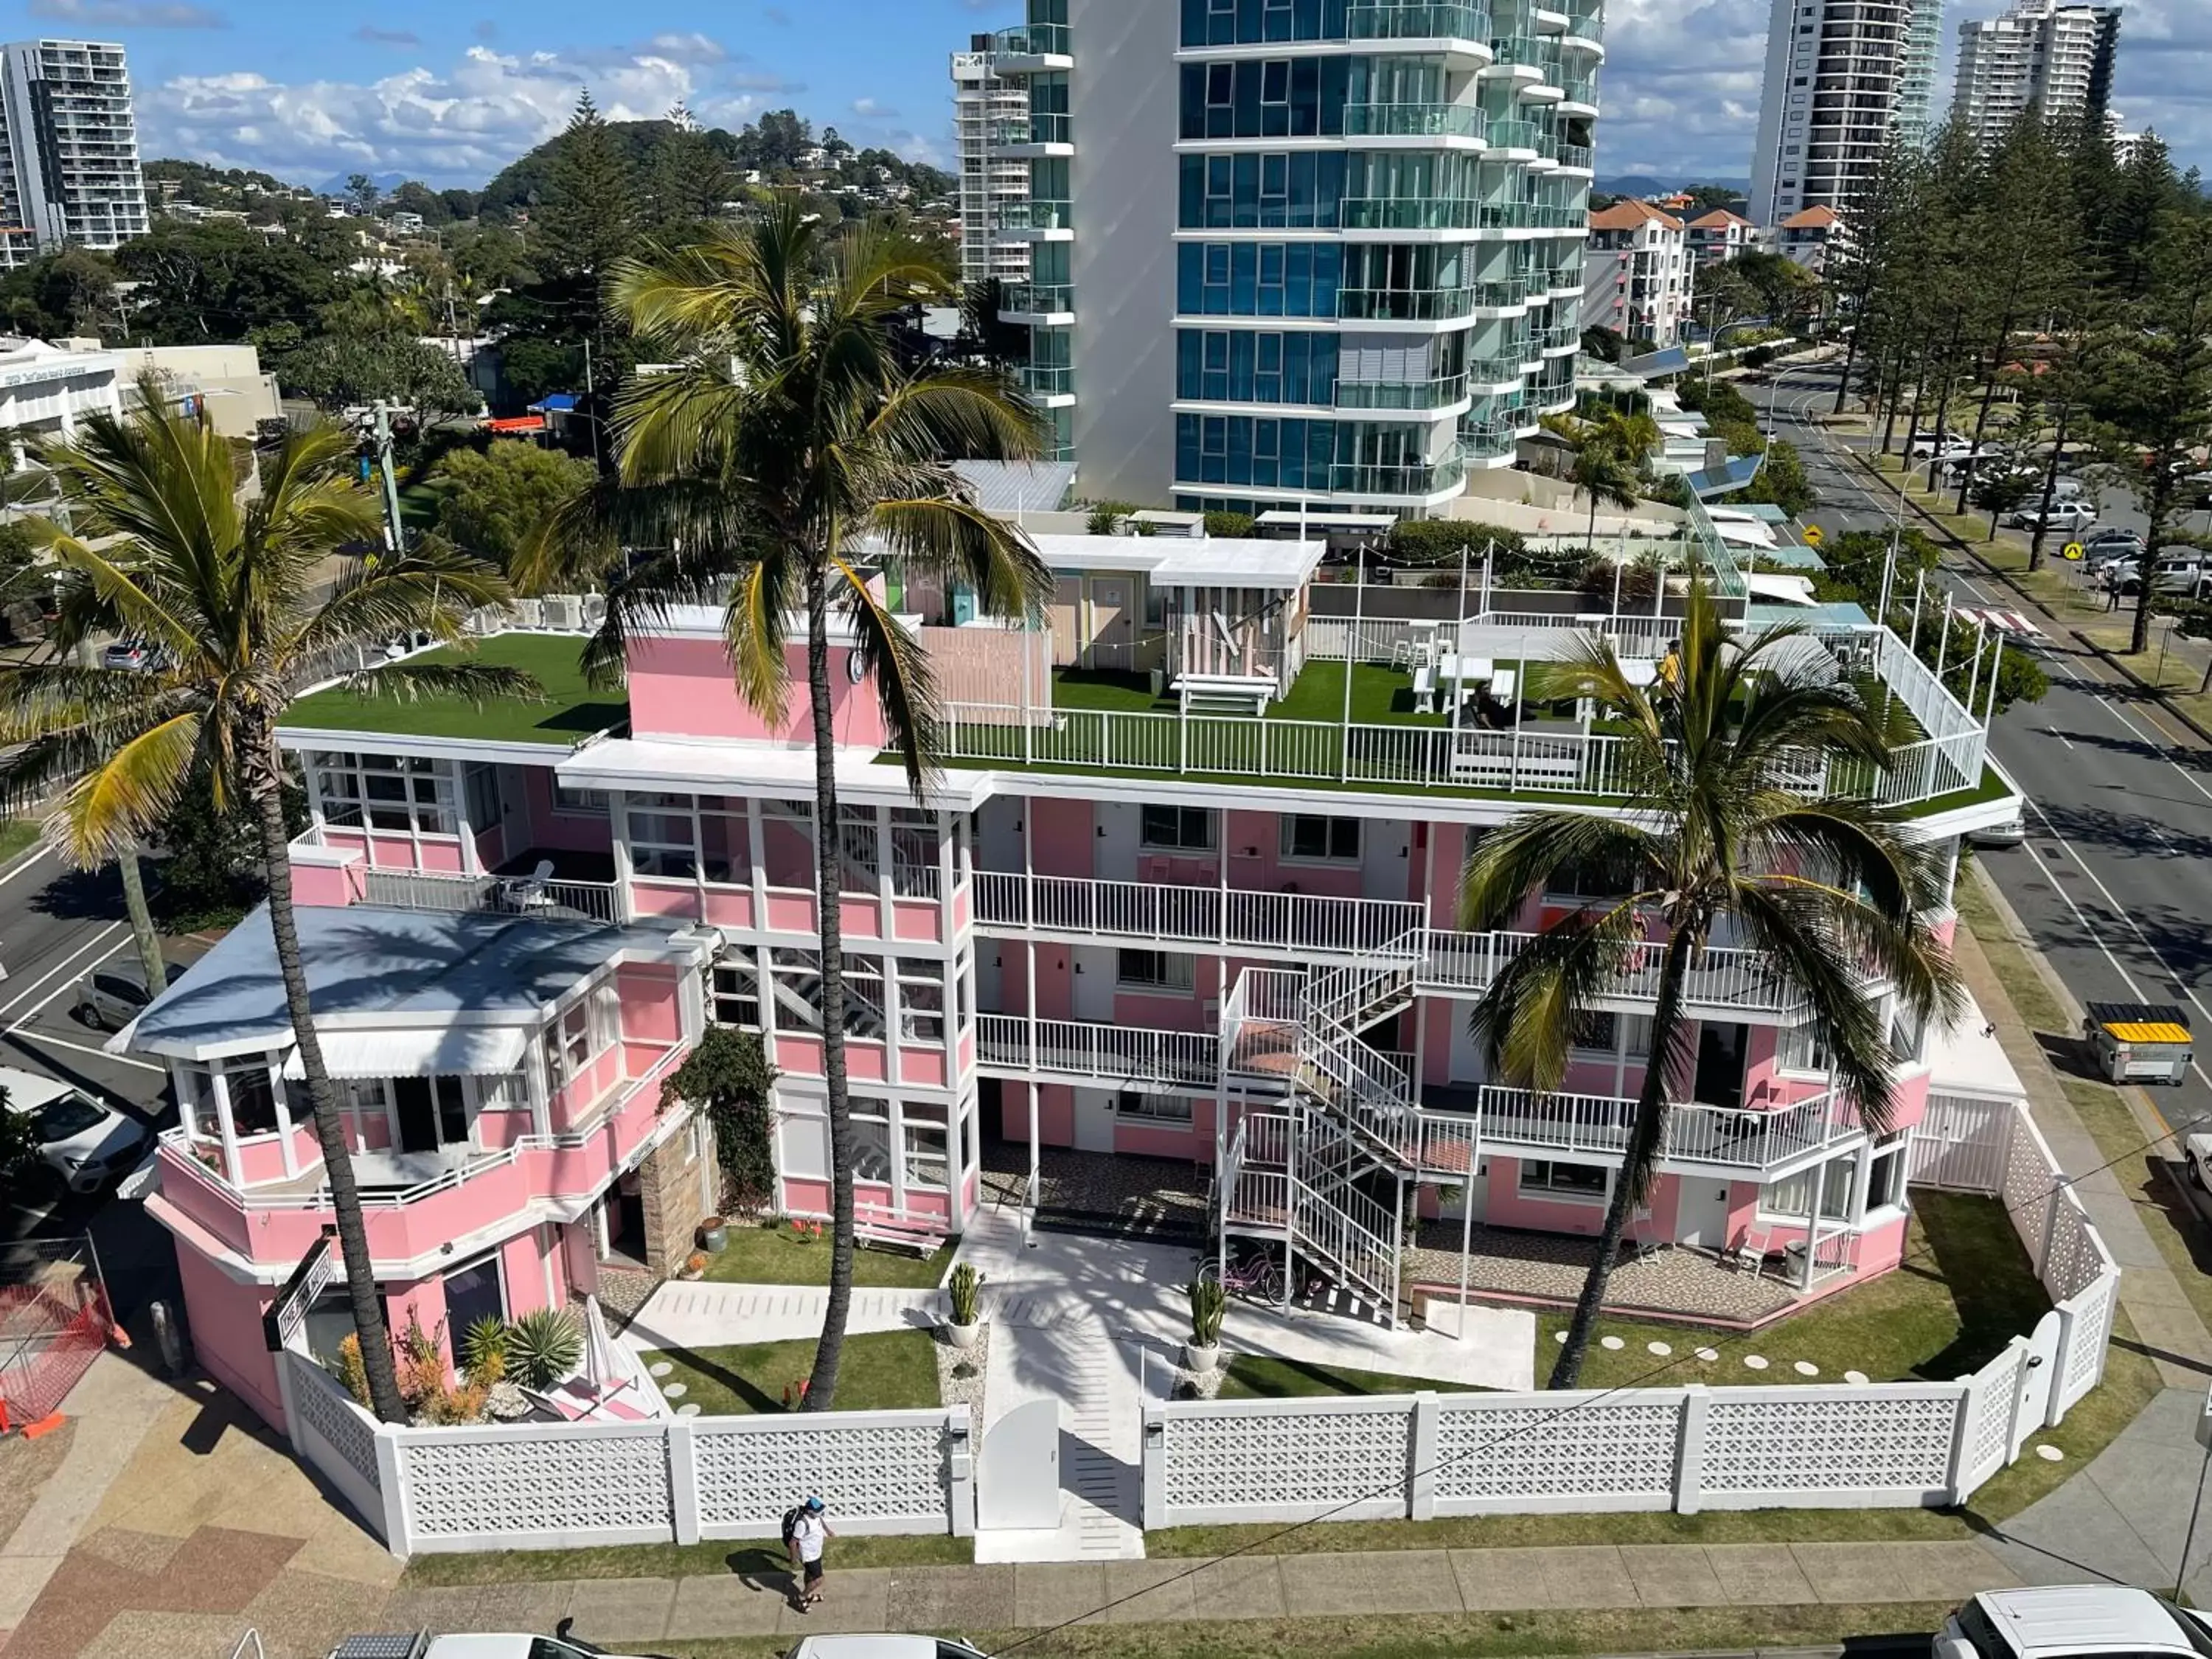 Property building, Bird's-eye View in The Pink Hotel Coolangatta